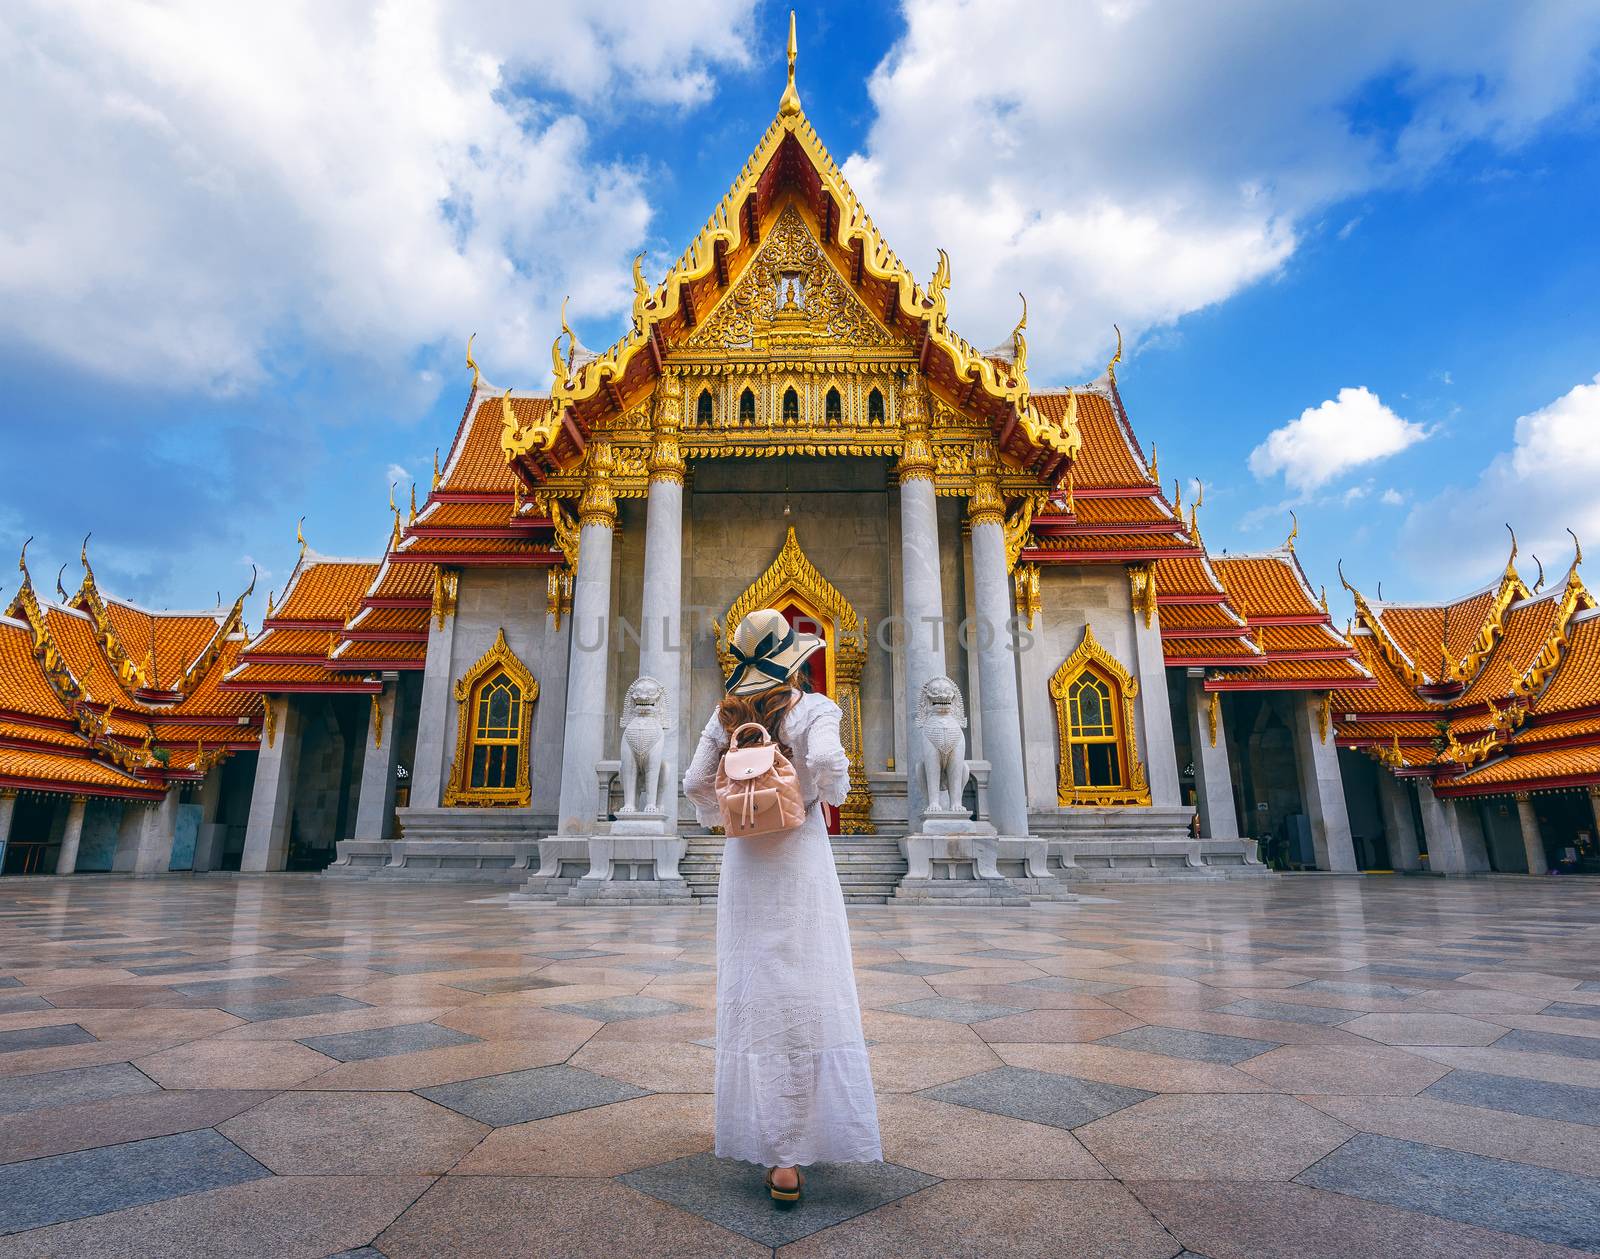 Women tourists at Wat Benchamabophit or the Marble Temple in Bangkok, Thailand. by gutarphotoghaphy